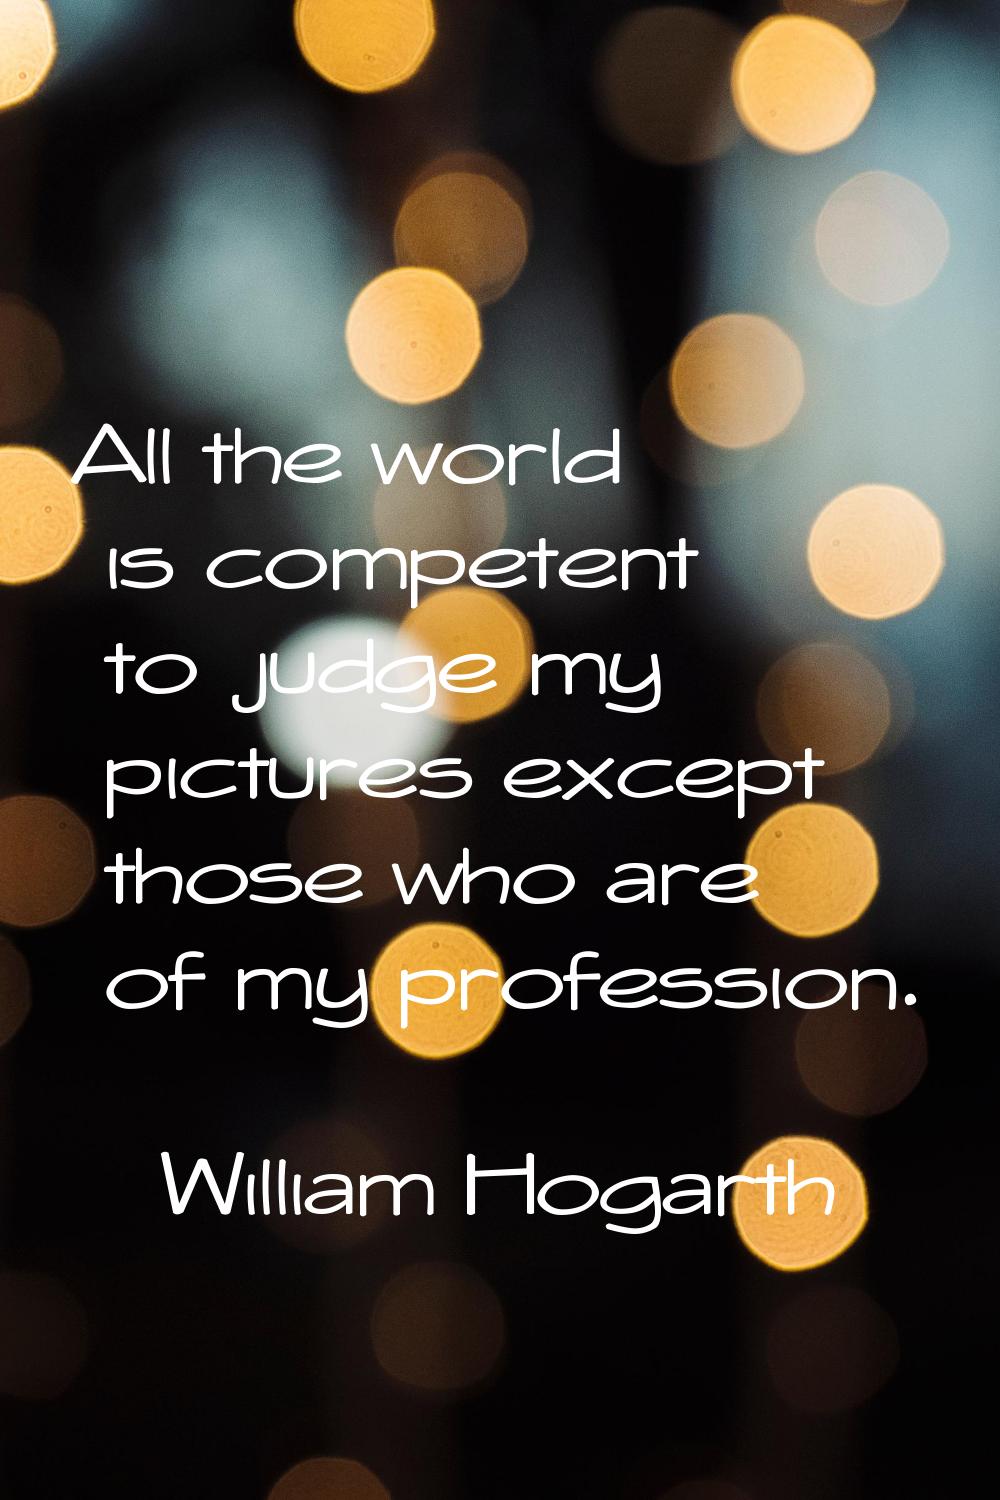 All the world is competent to judge my pictures except those who are of my profession.